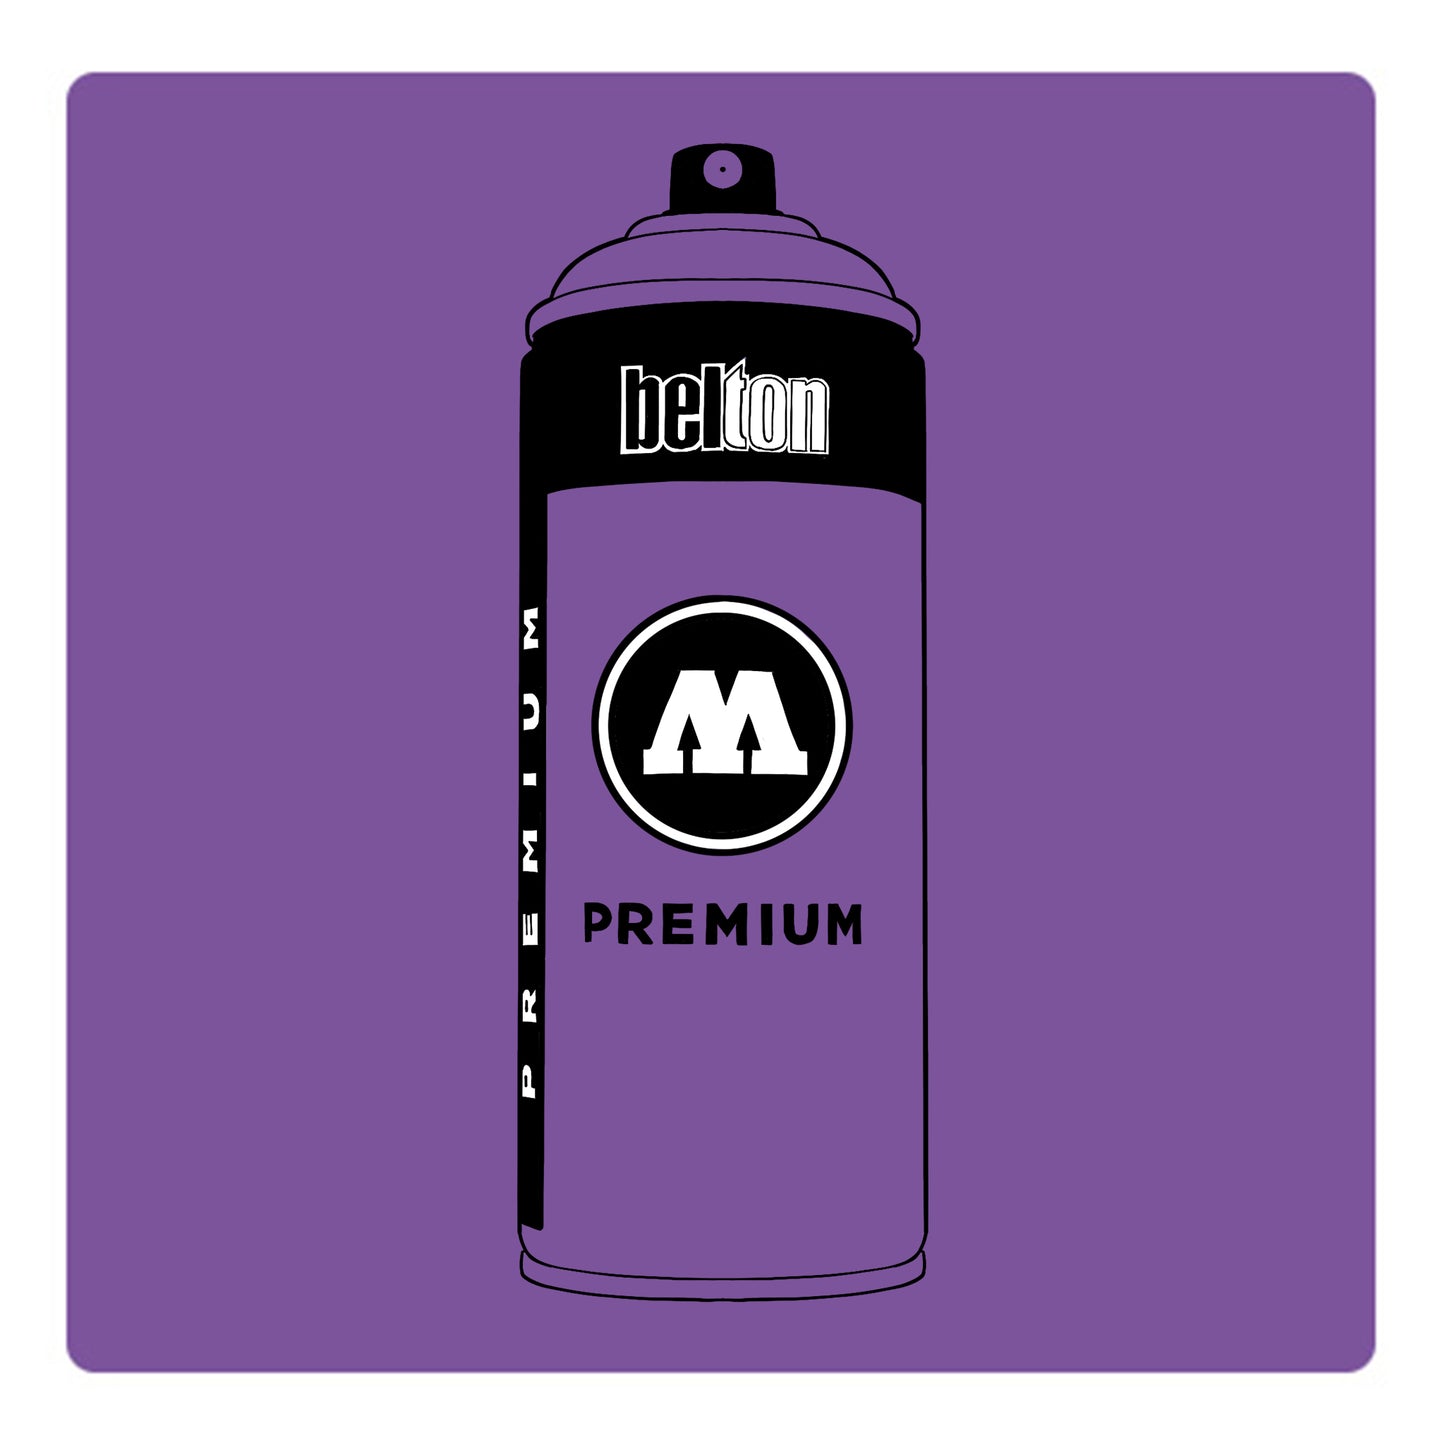 A black outline drawing of a light  purple spray paint can with the words "belton","premium" and the letter"M" written on the face in black and white font. The background is a color swatch of the same light  purple with a white border.